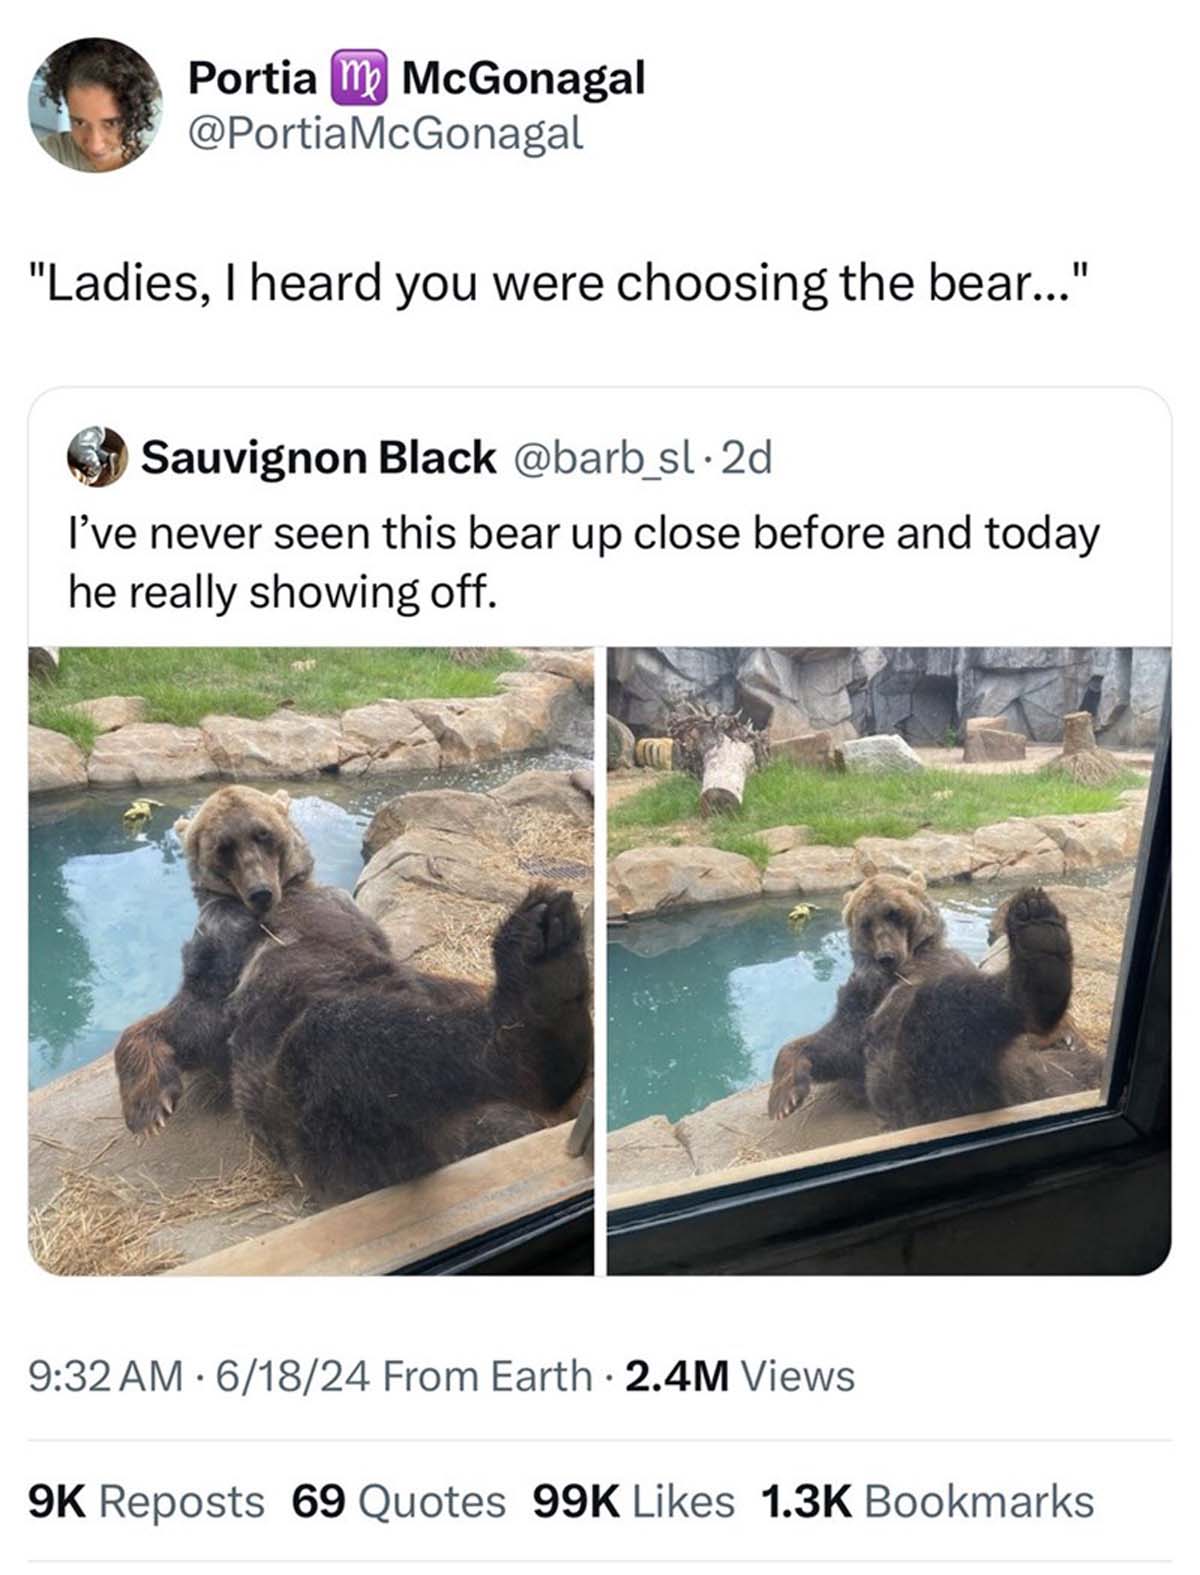 photo caption - Portia m McGonagal "Ladies, I heard you were choosing the bear..." Sauvignon Black .2d I've never seen this bear up close before and today he really showing off. 61824 From Earth 2.4M Views 9K Reposts 69 Quotes 99K Bookmarks